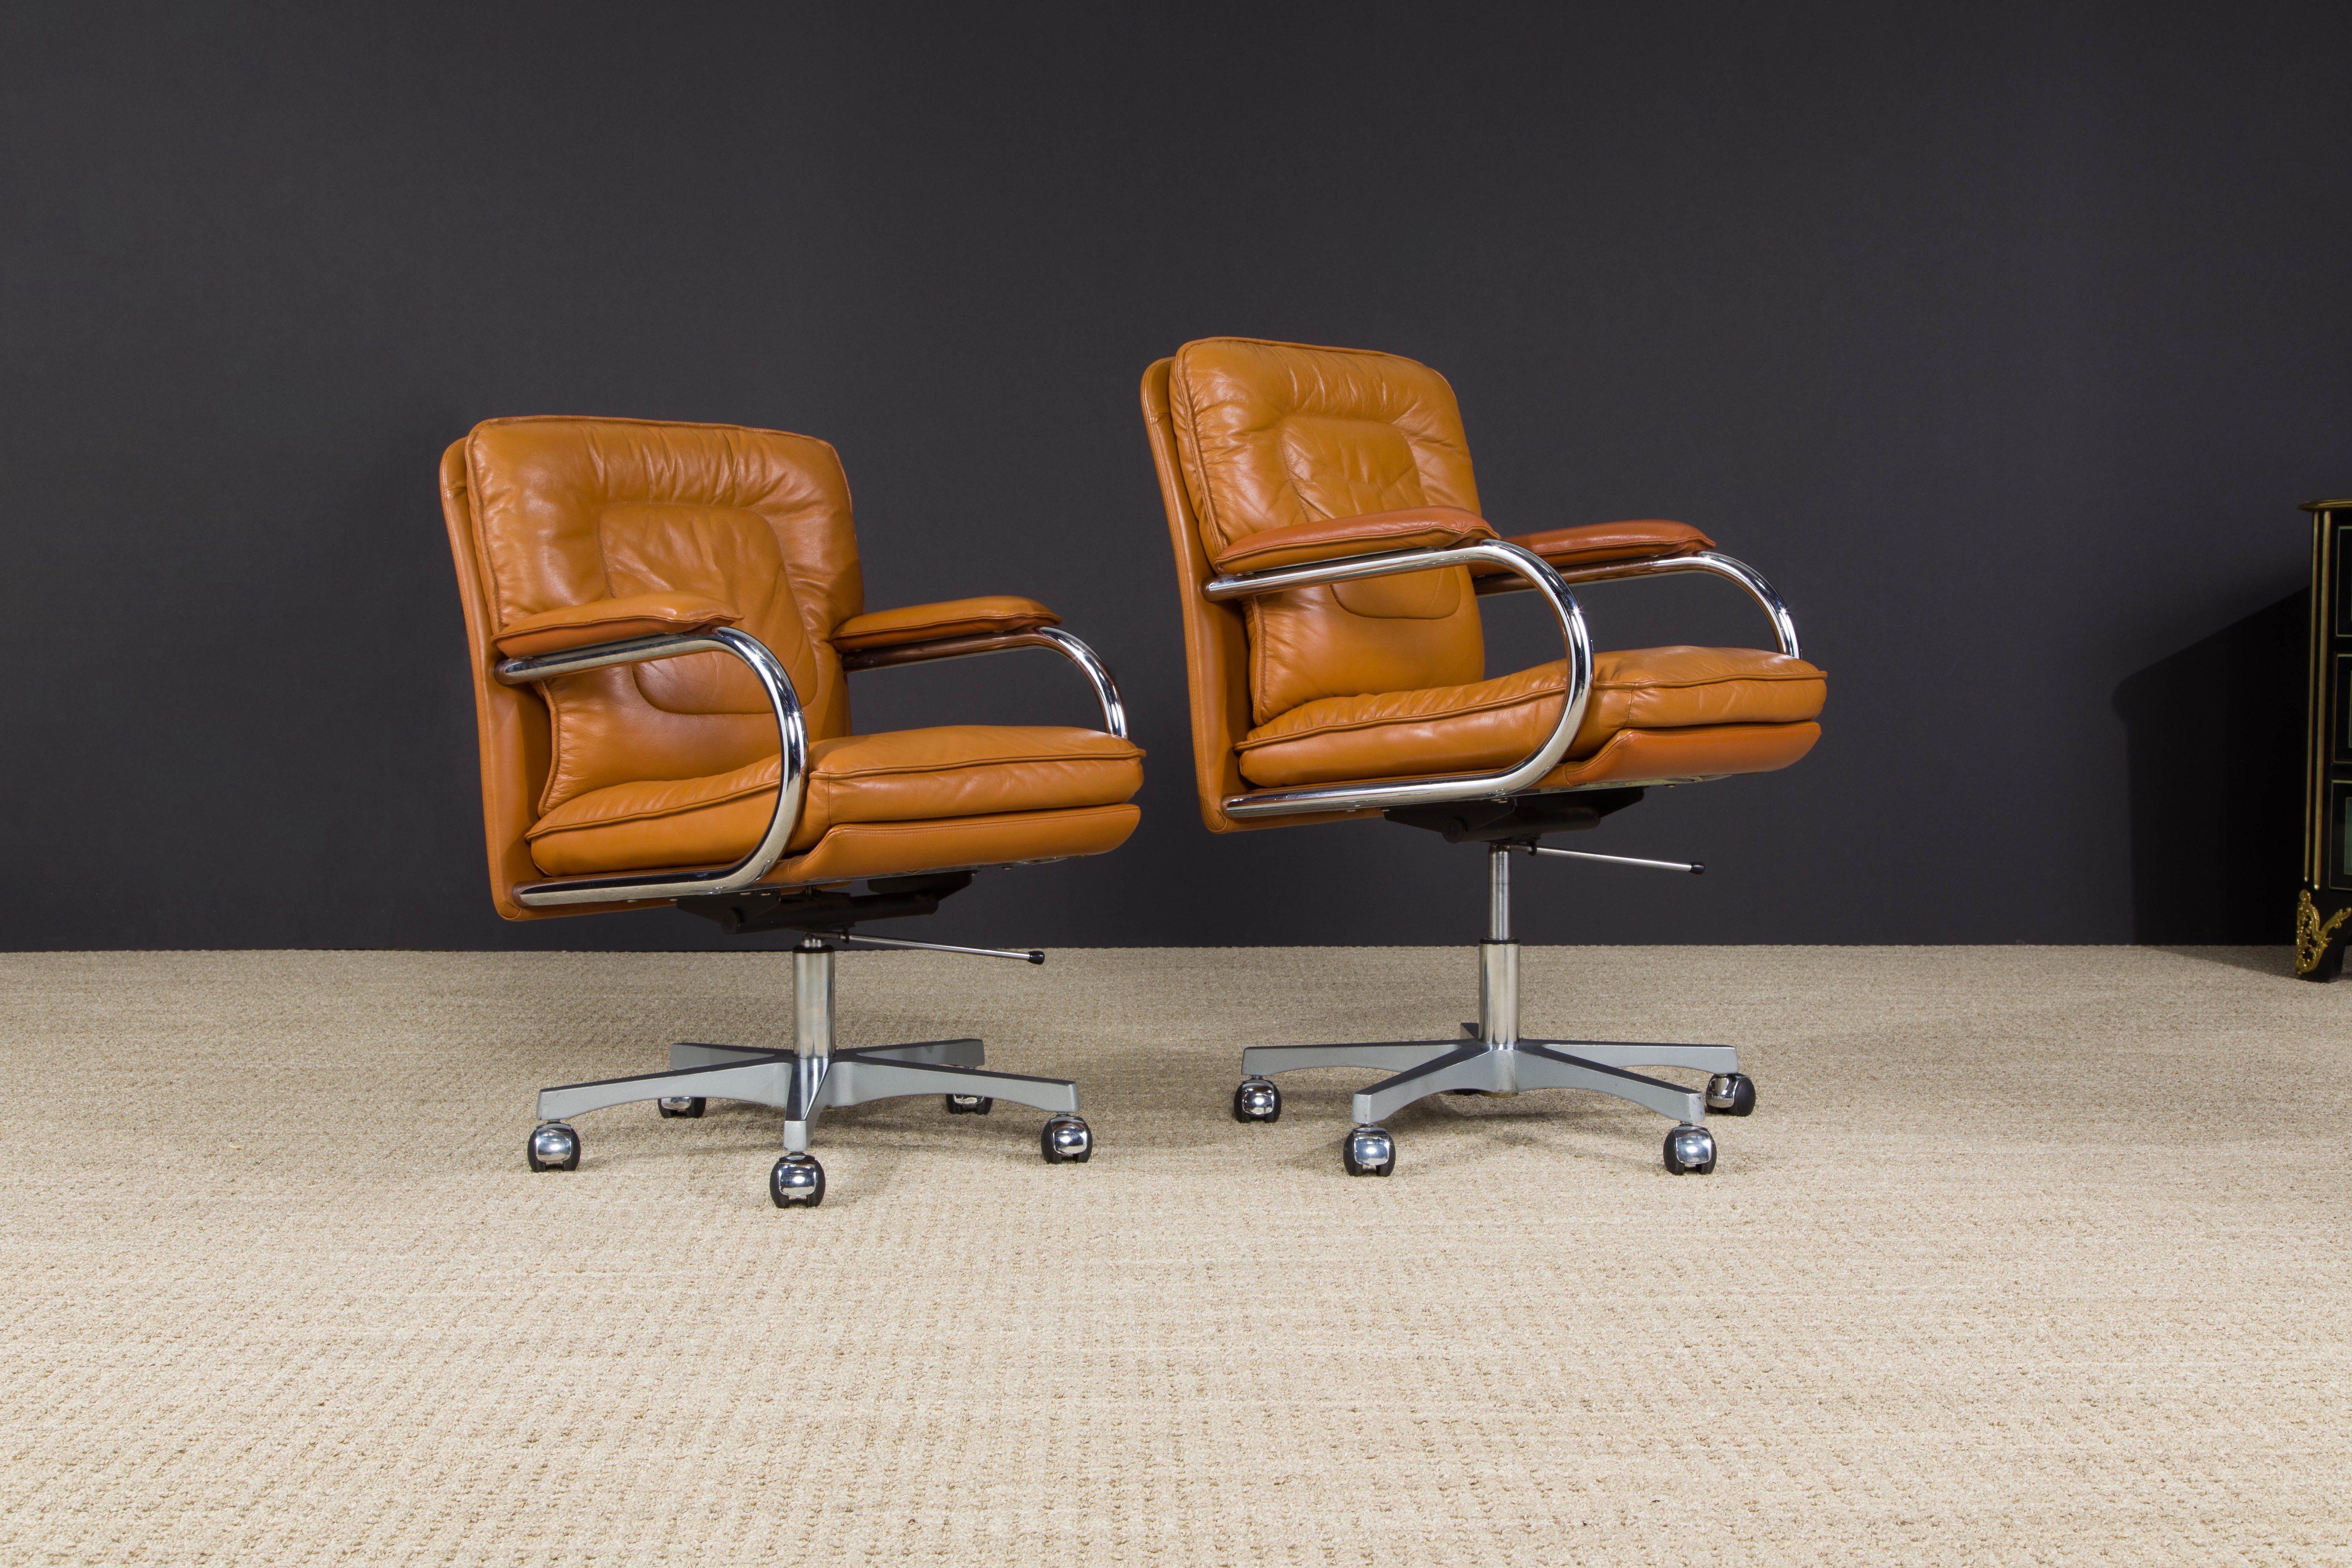 Late 20th Century Guido Faleschini Leather Management Desk Chairs for i4 Mariani, c. 1980, Signed